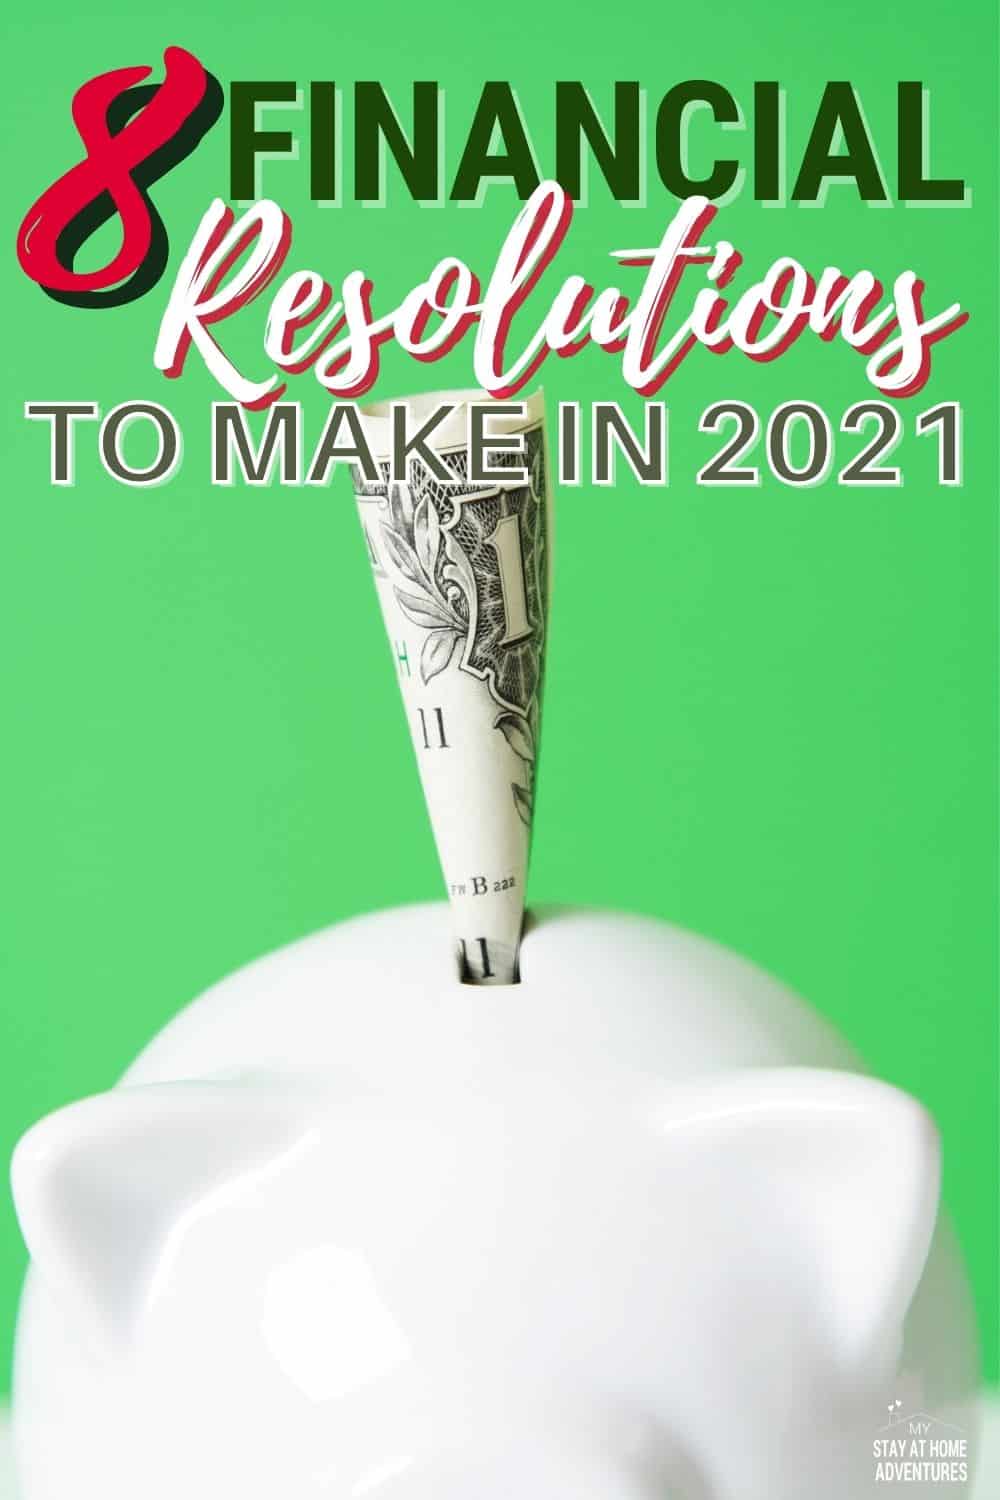 Check out 8 financial resolutions you can make in 2021 to make this year better for your financial health. Reduce your money stress this year. #2021 #financialgoals #moneymanagement via @mystayathome